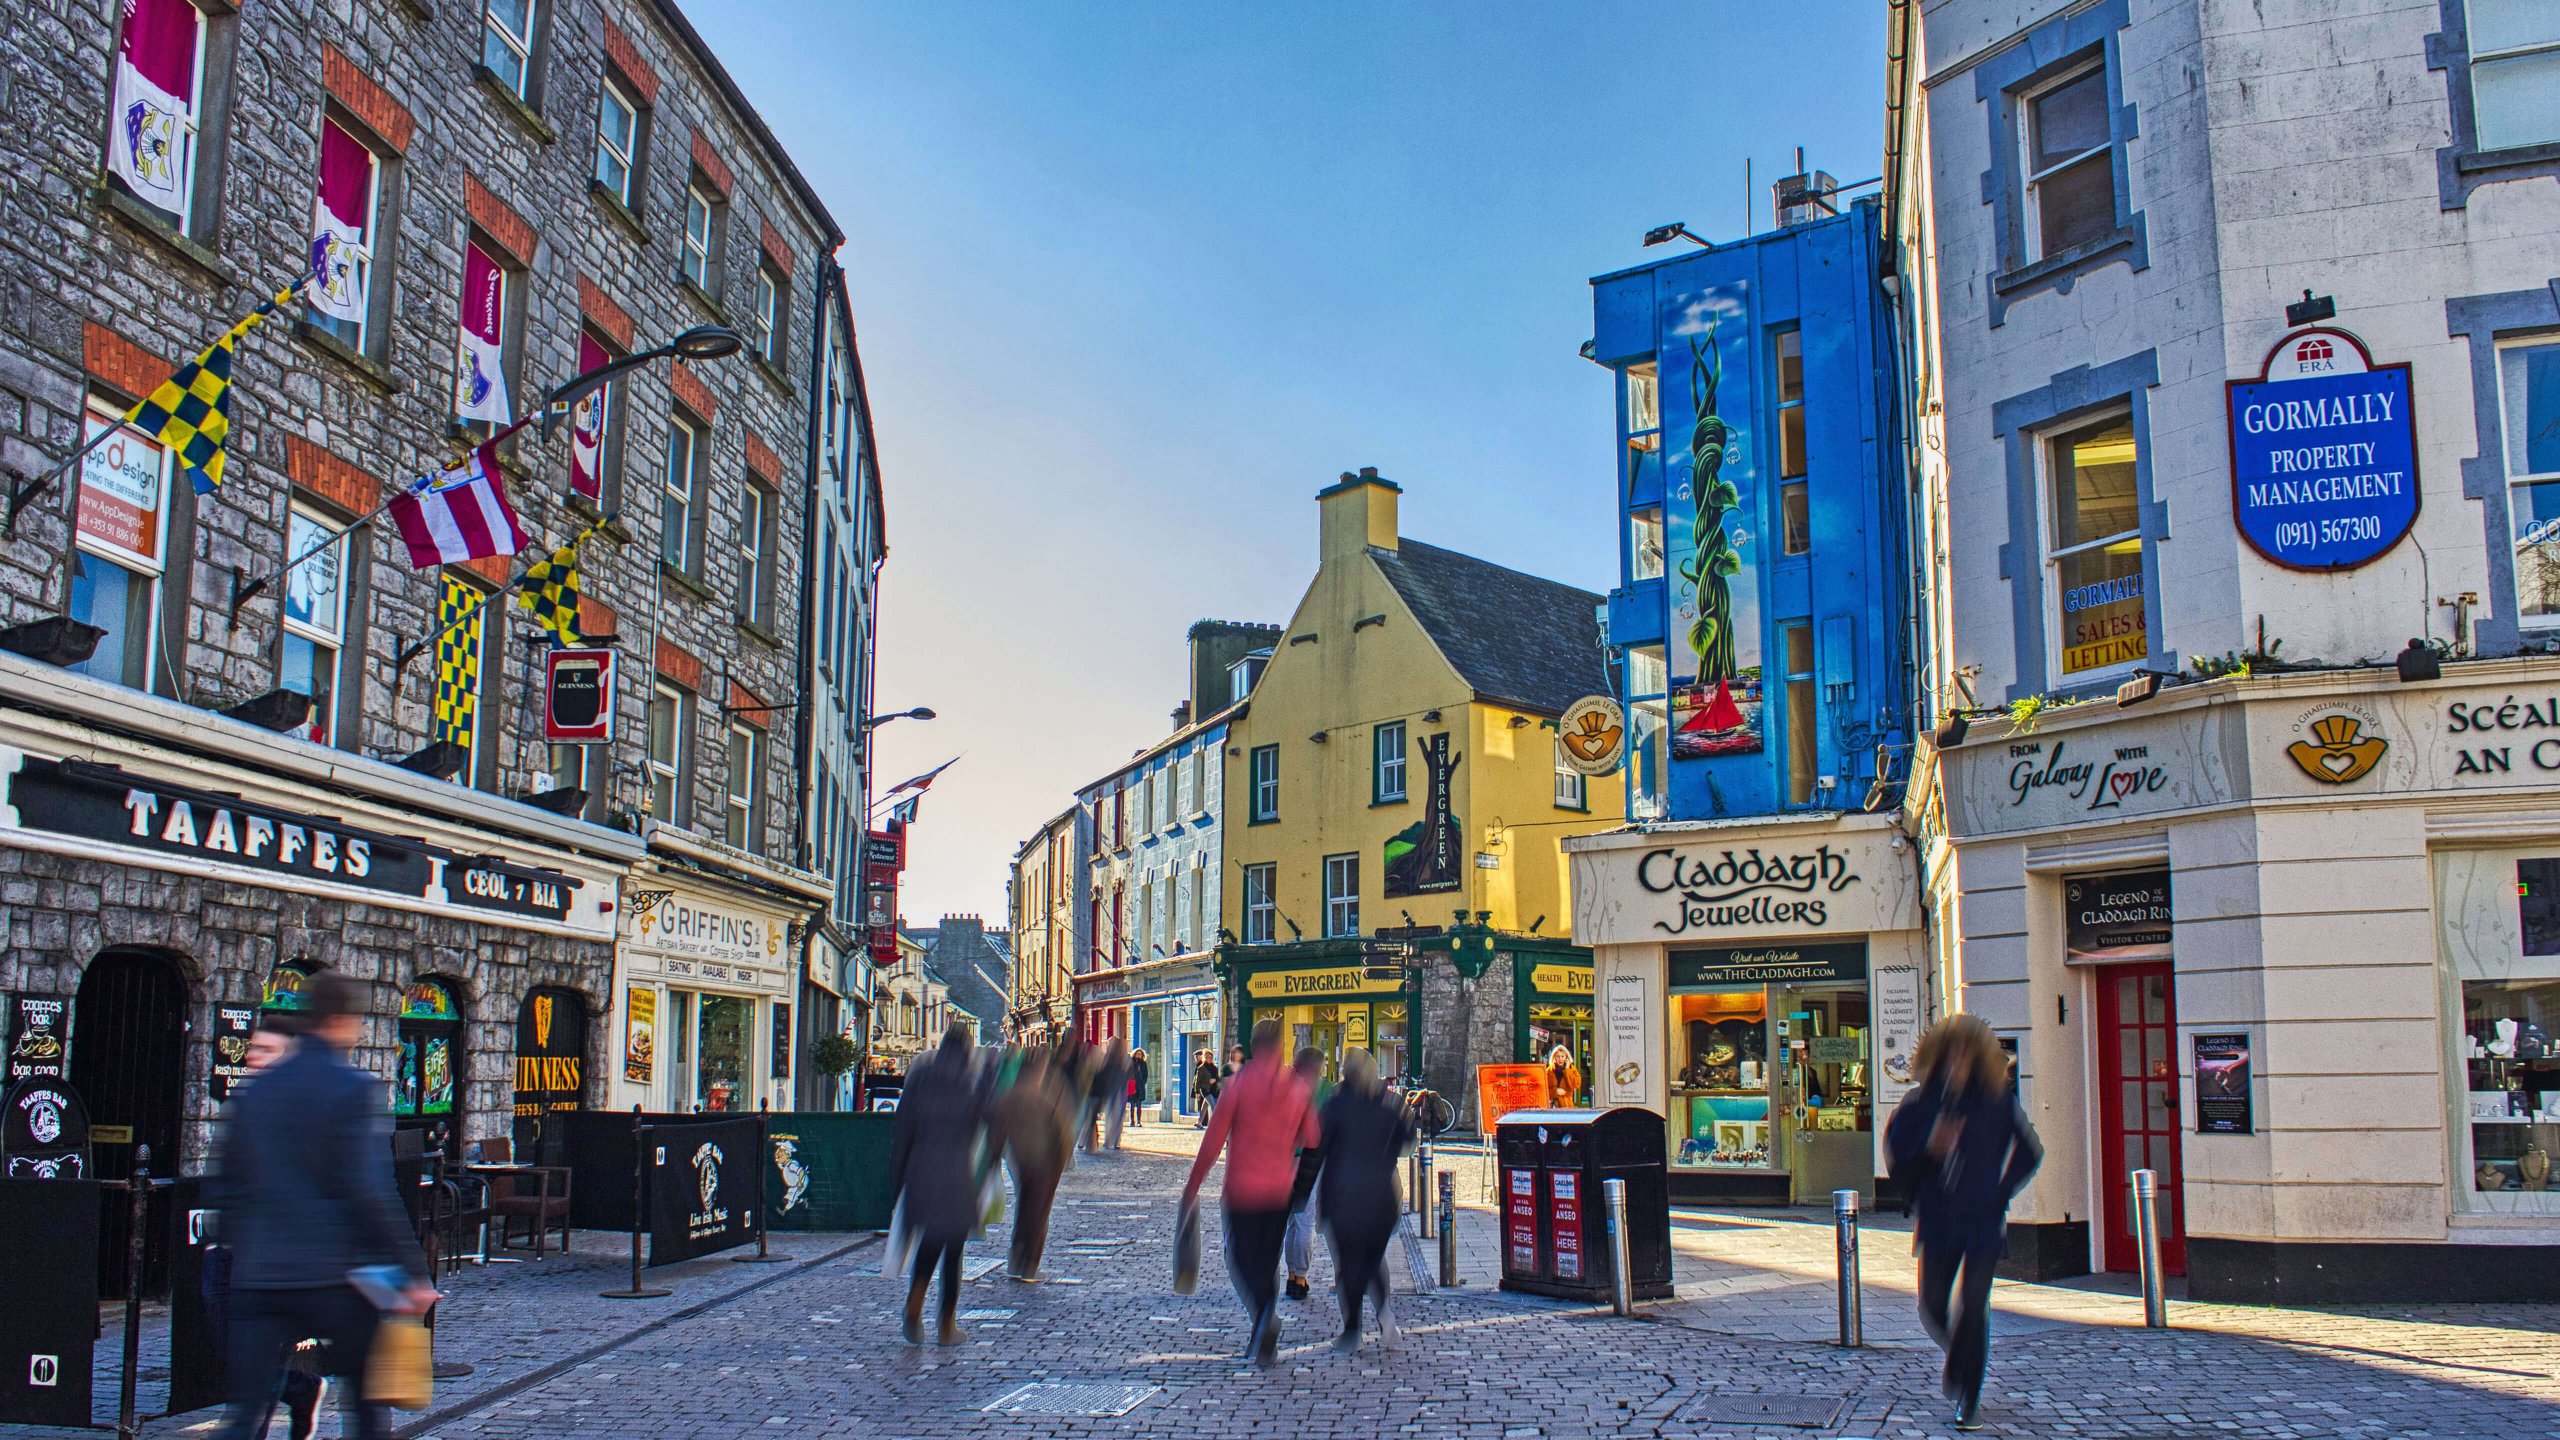 A bright and colourful street scene in Galway, Ireland